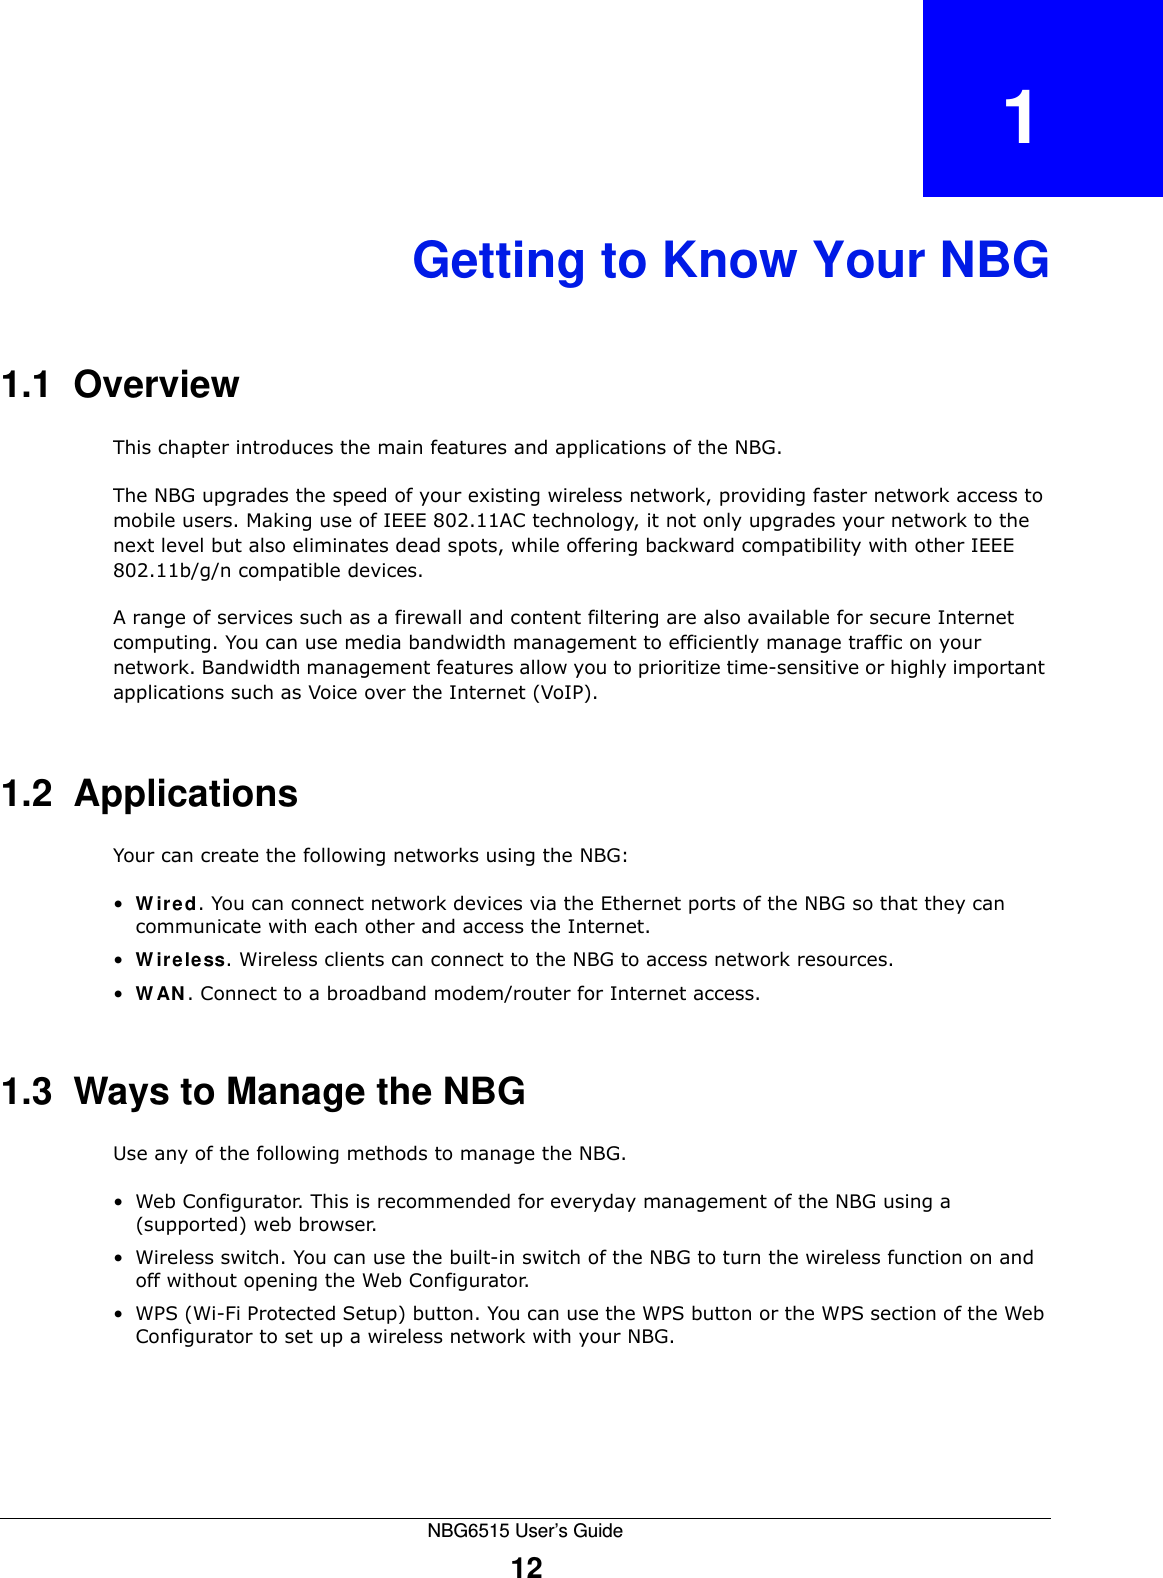 NBG6515 User’s Guide12CHAPTER   1Getting to Know Your NBG1.1  OverviewThis chapter introduces the main features and applications of the NBG.The NBG upgrades the speed of your existing wireless network, providing faster network access to mobile users. Making use of IEEE 802.11AC technology, it not only upgrades your network to the next level but also eliminates dead spots, while offering backward compatibility with other IEEE 802.11b/g/n compatible devices.A range of services such as a firewall and content filtering are also available for secure Internet computing. You can use media bandwidth management to efficiently manage traffic on your network. Bandwidth management features allow you to prioritize time-sensitive or highly important applications such as Voice over the Internet (VoIP).1.2  ApplicationsYour can create the following networks using the NBG:•Wired. You can connect network devices via the Ethernet ports of the NBG so that they can communicate with each other and access the Internet.•Wireless. Wireless clients can connect to the NBG to access network resources.•WAN. Connect to a broadband modem/router for Internet access. 1.3  Ways to Manage the NBGUse any of the following methods to manage the NBG.• Web Configurator. This is recommended for everyday management of the NBG using a (supported) web browser.• Wireless switch. You can use the built-in switch of the NBG to turn the wireless function on and off without opening the Web Configurator. • WPS (Wi-Fi Protected Setup) button. You can use the WPS button or the WPS section of the Web Configurator to set up a wireless network with your NBG.